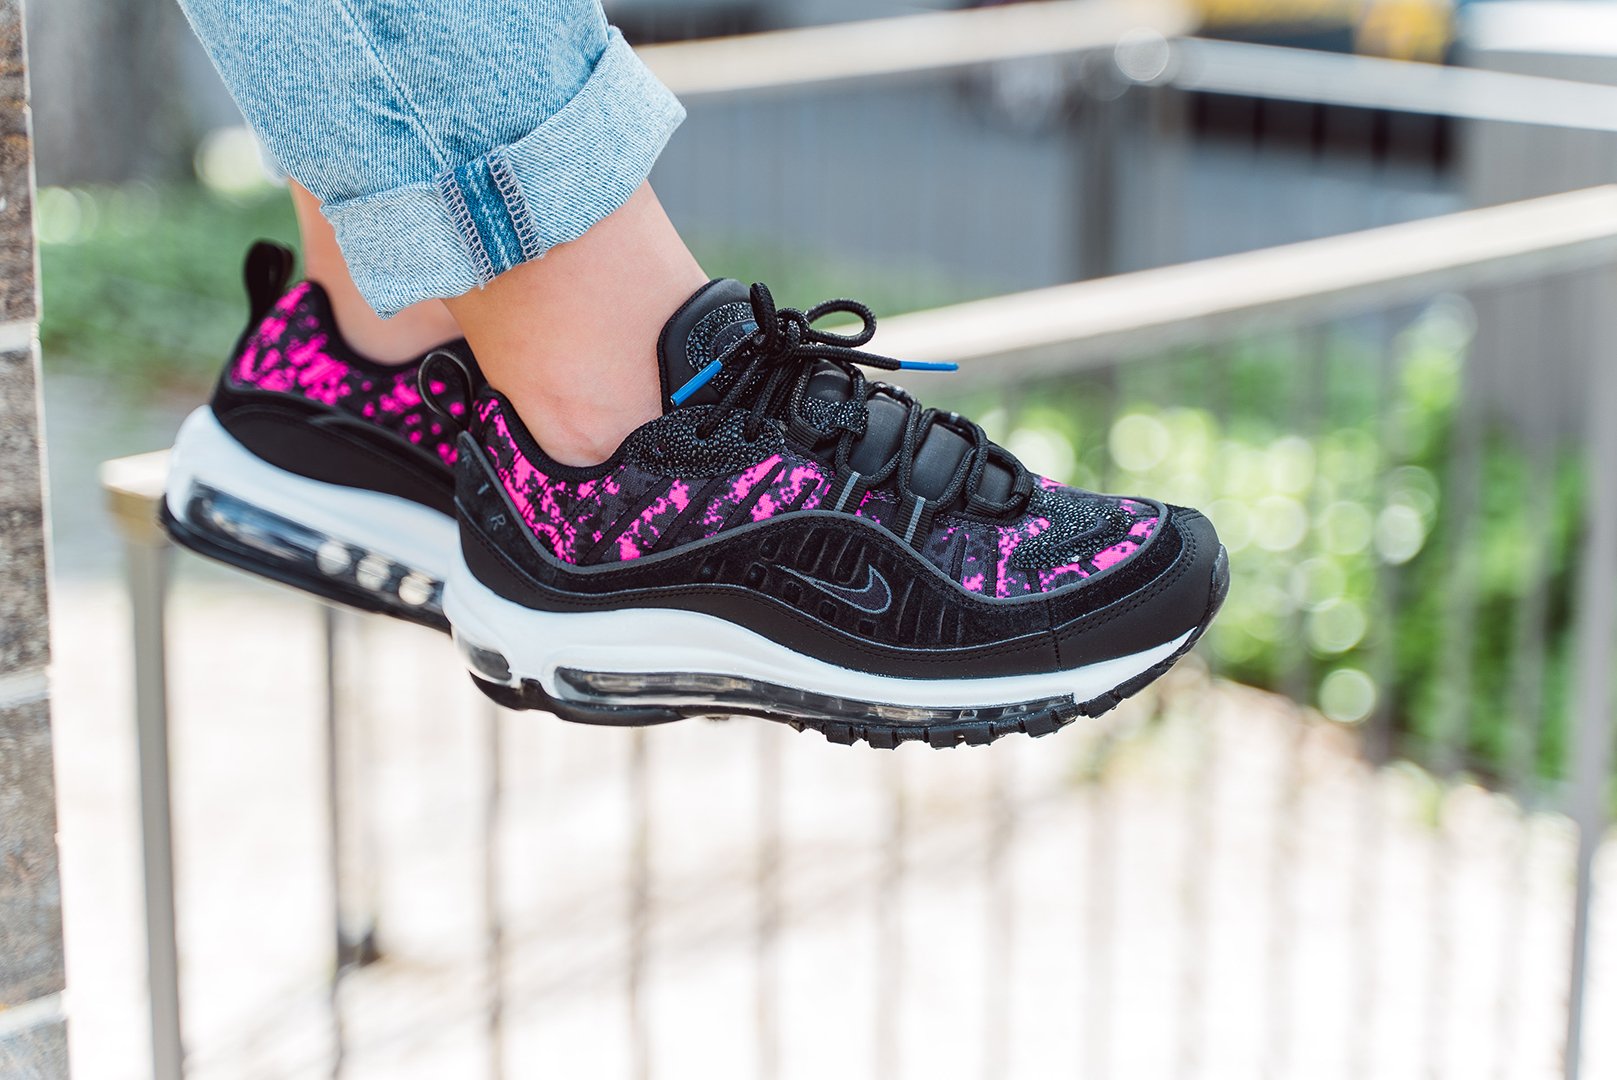 Nest Mastery Dissatisfied 43einhalb on Twitter: "The new @Nike WMNS Air Max 98 PRM »Pink Pixel« is  available here: https://t.co/w7aoBomNb6 https://t.co/kFbfRxPDsd" / Twitter